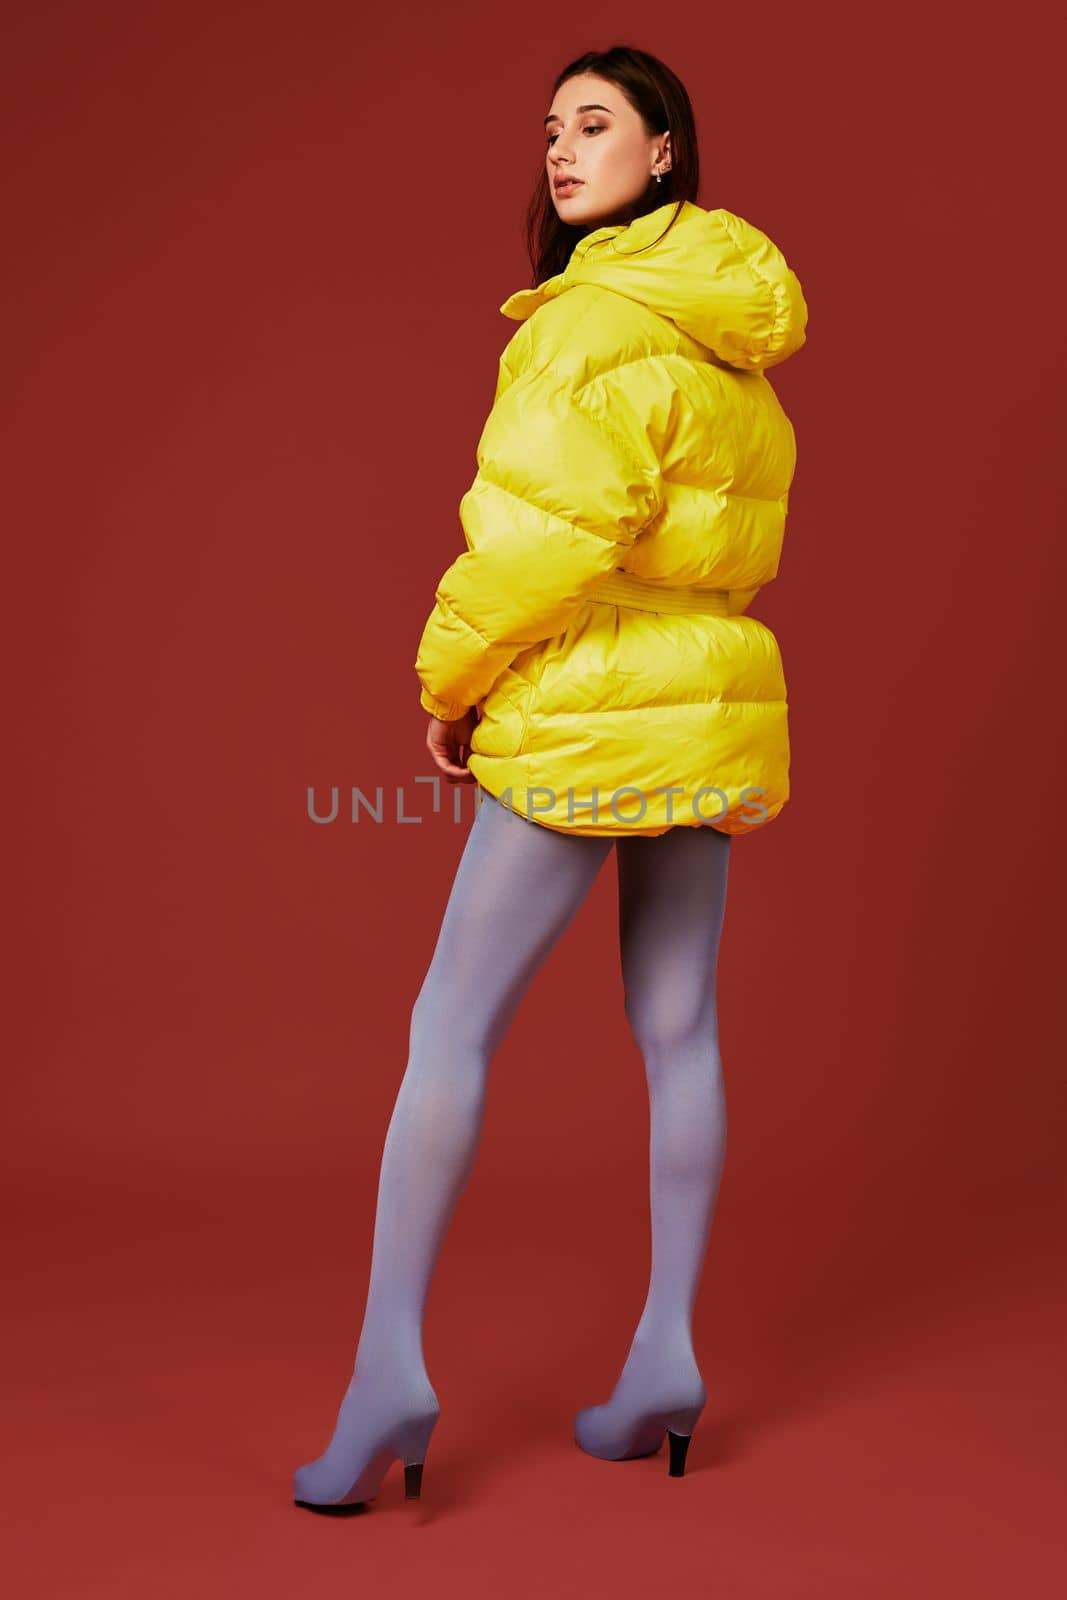 Studio portrait of young brunette woman in yellow down jacket and grey blue panty hoses or stockings. Studio shot by nazarovsergey